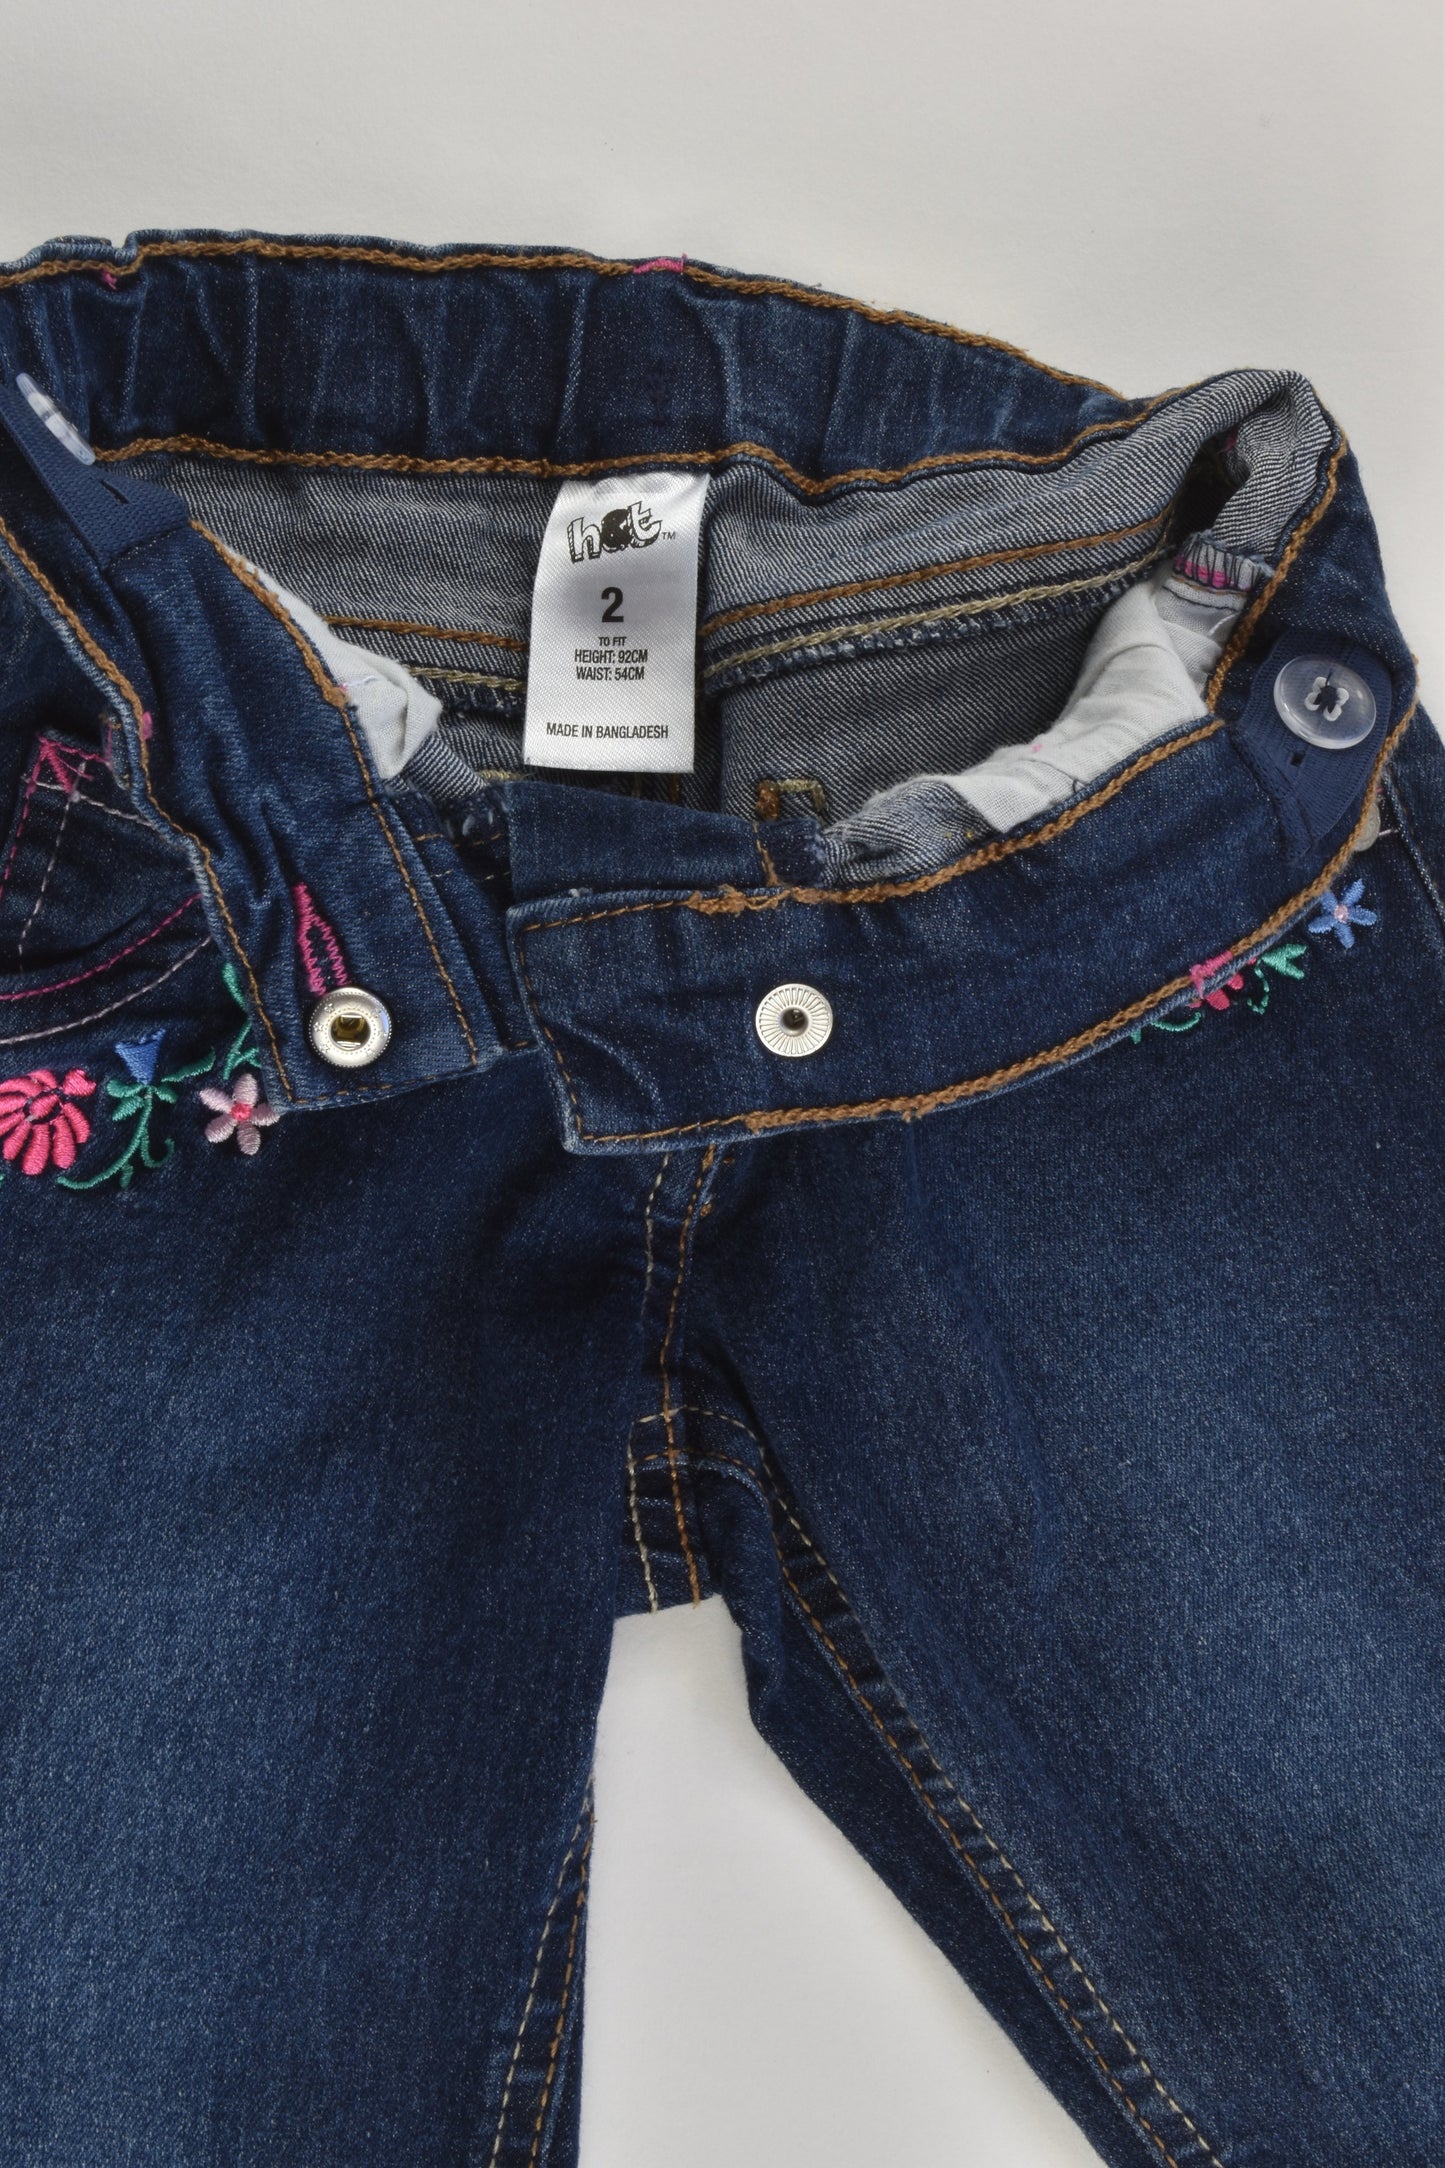 H&T Size 2 Stretchy Denim Pants with Floral Embroidery